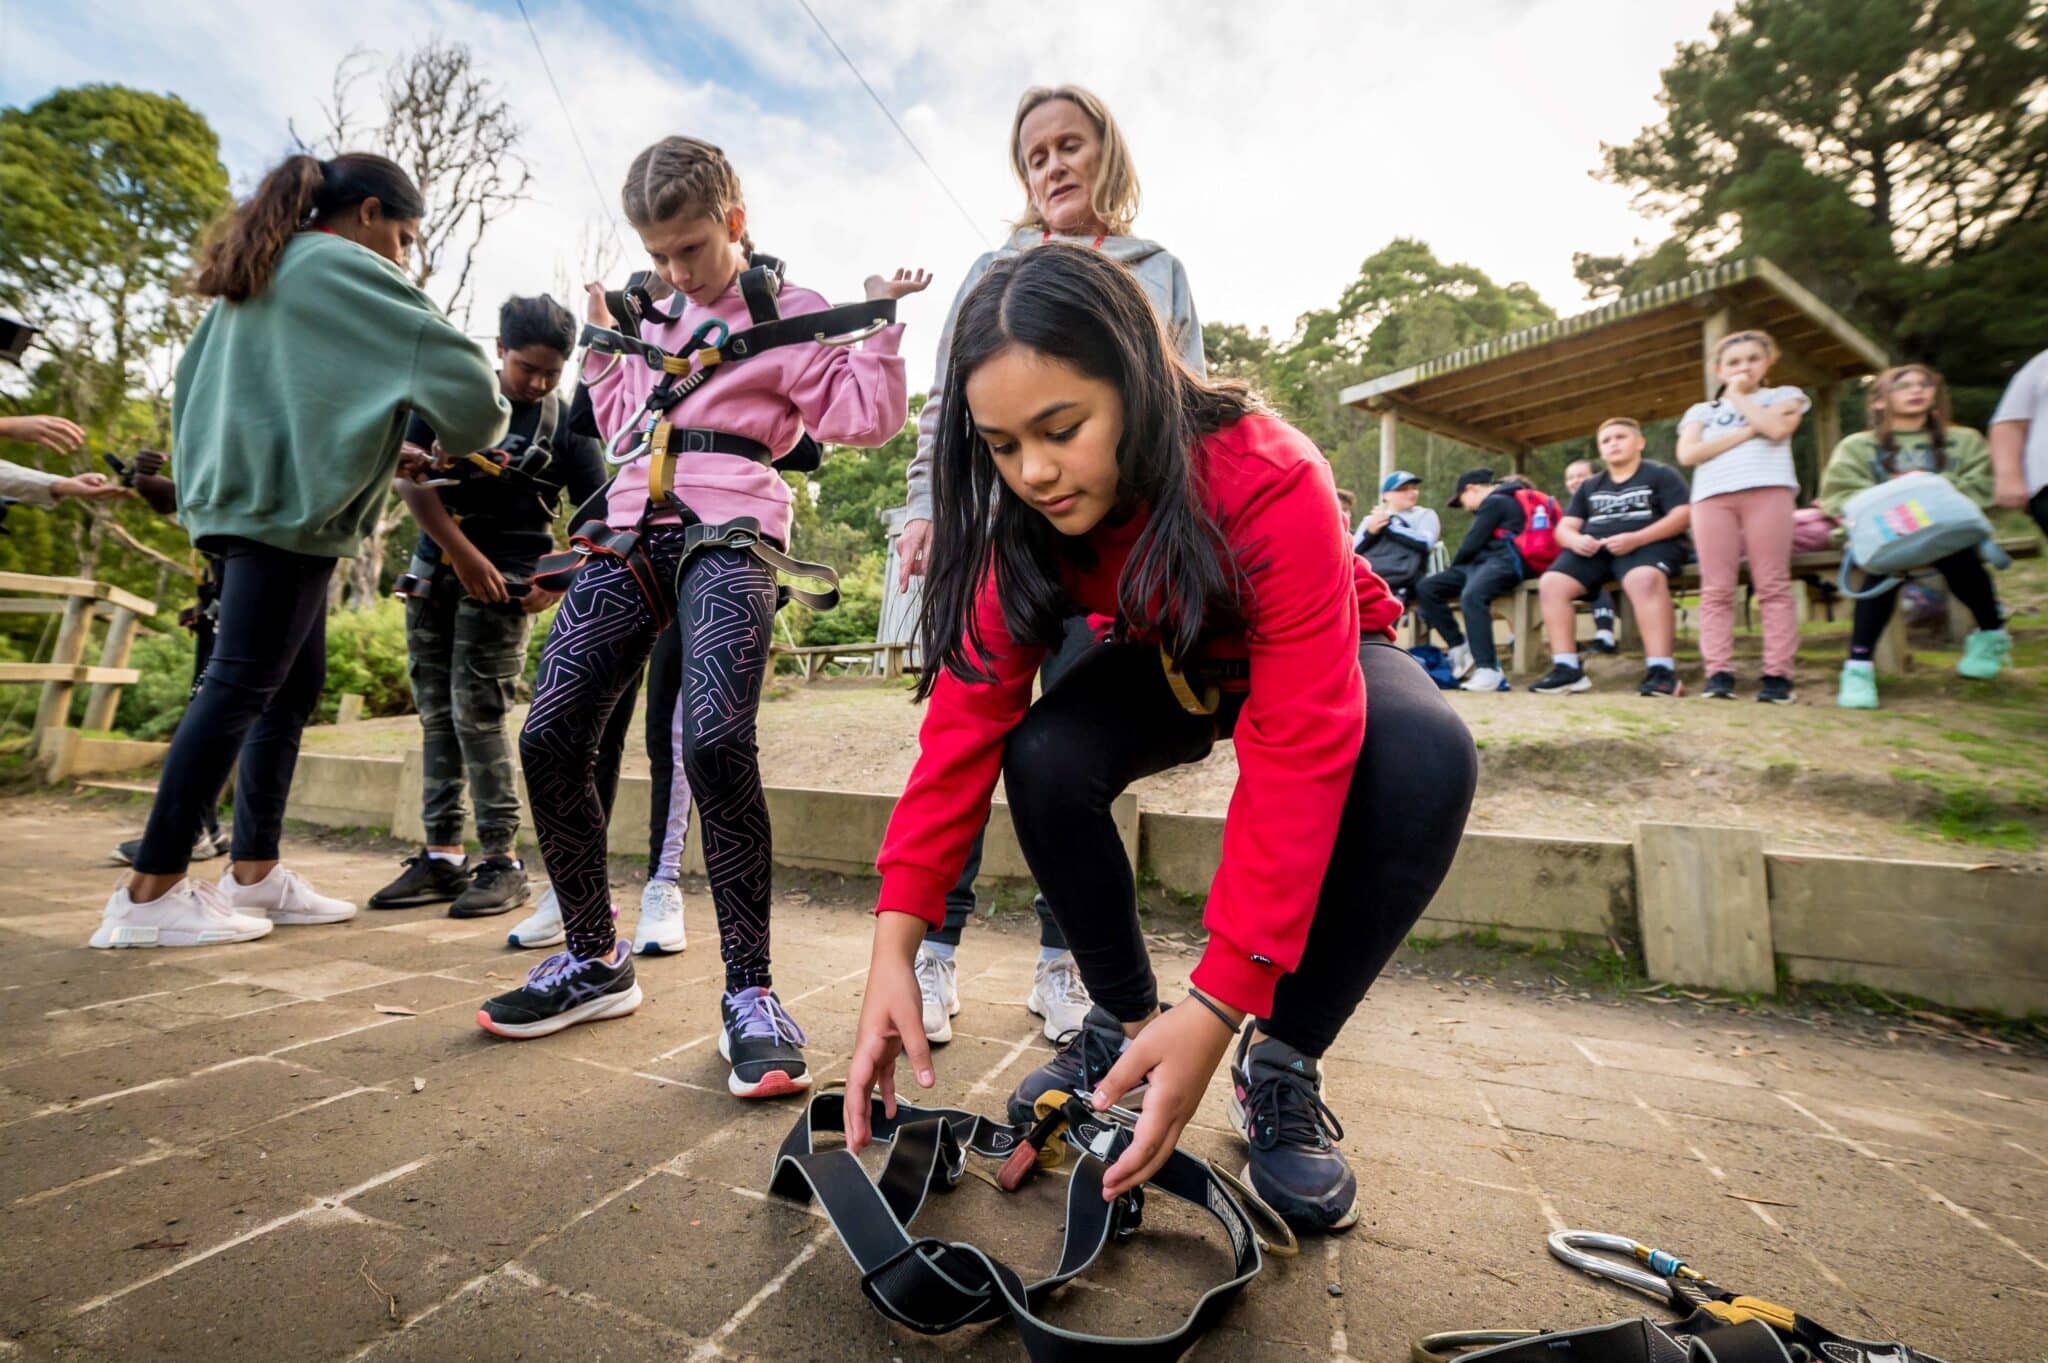 A girl secures her shoes while a group of young people unite to prepare for an outdoor activity, with an instructor assisting in the background.